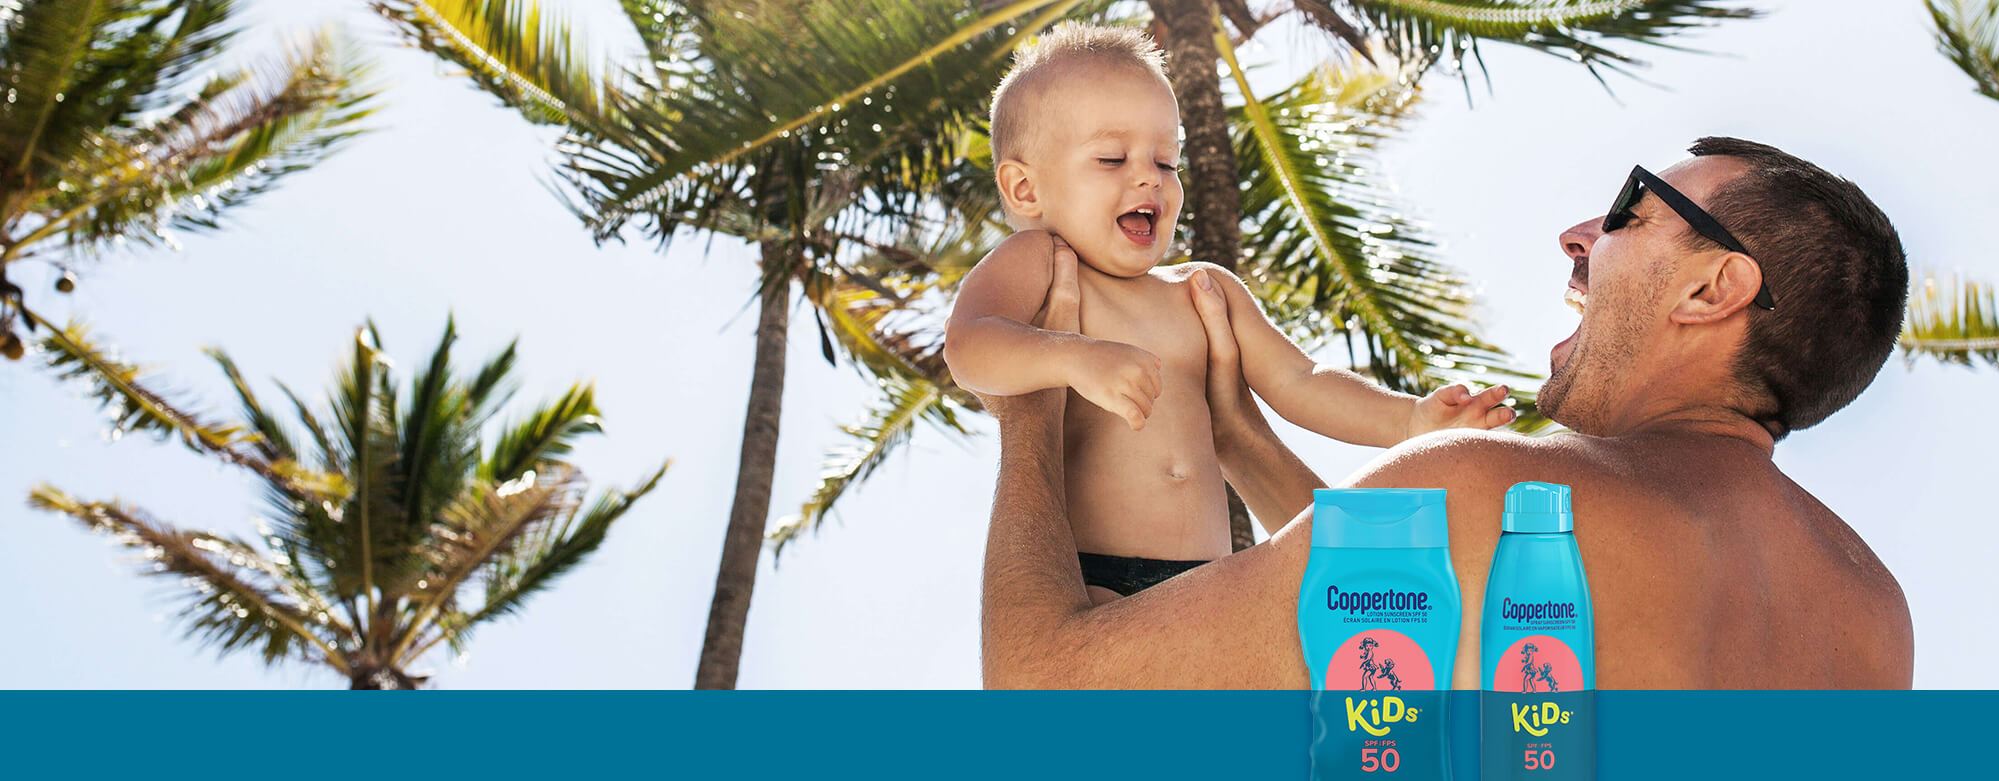 A view of a male model lifting a small child in the air with two Coppertone Kids Sunscreen products displayed in front and palm trees shown behind.